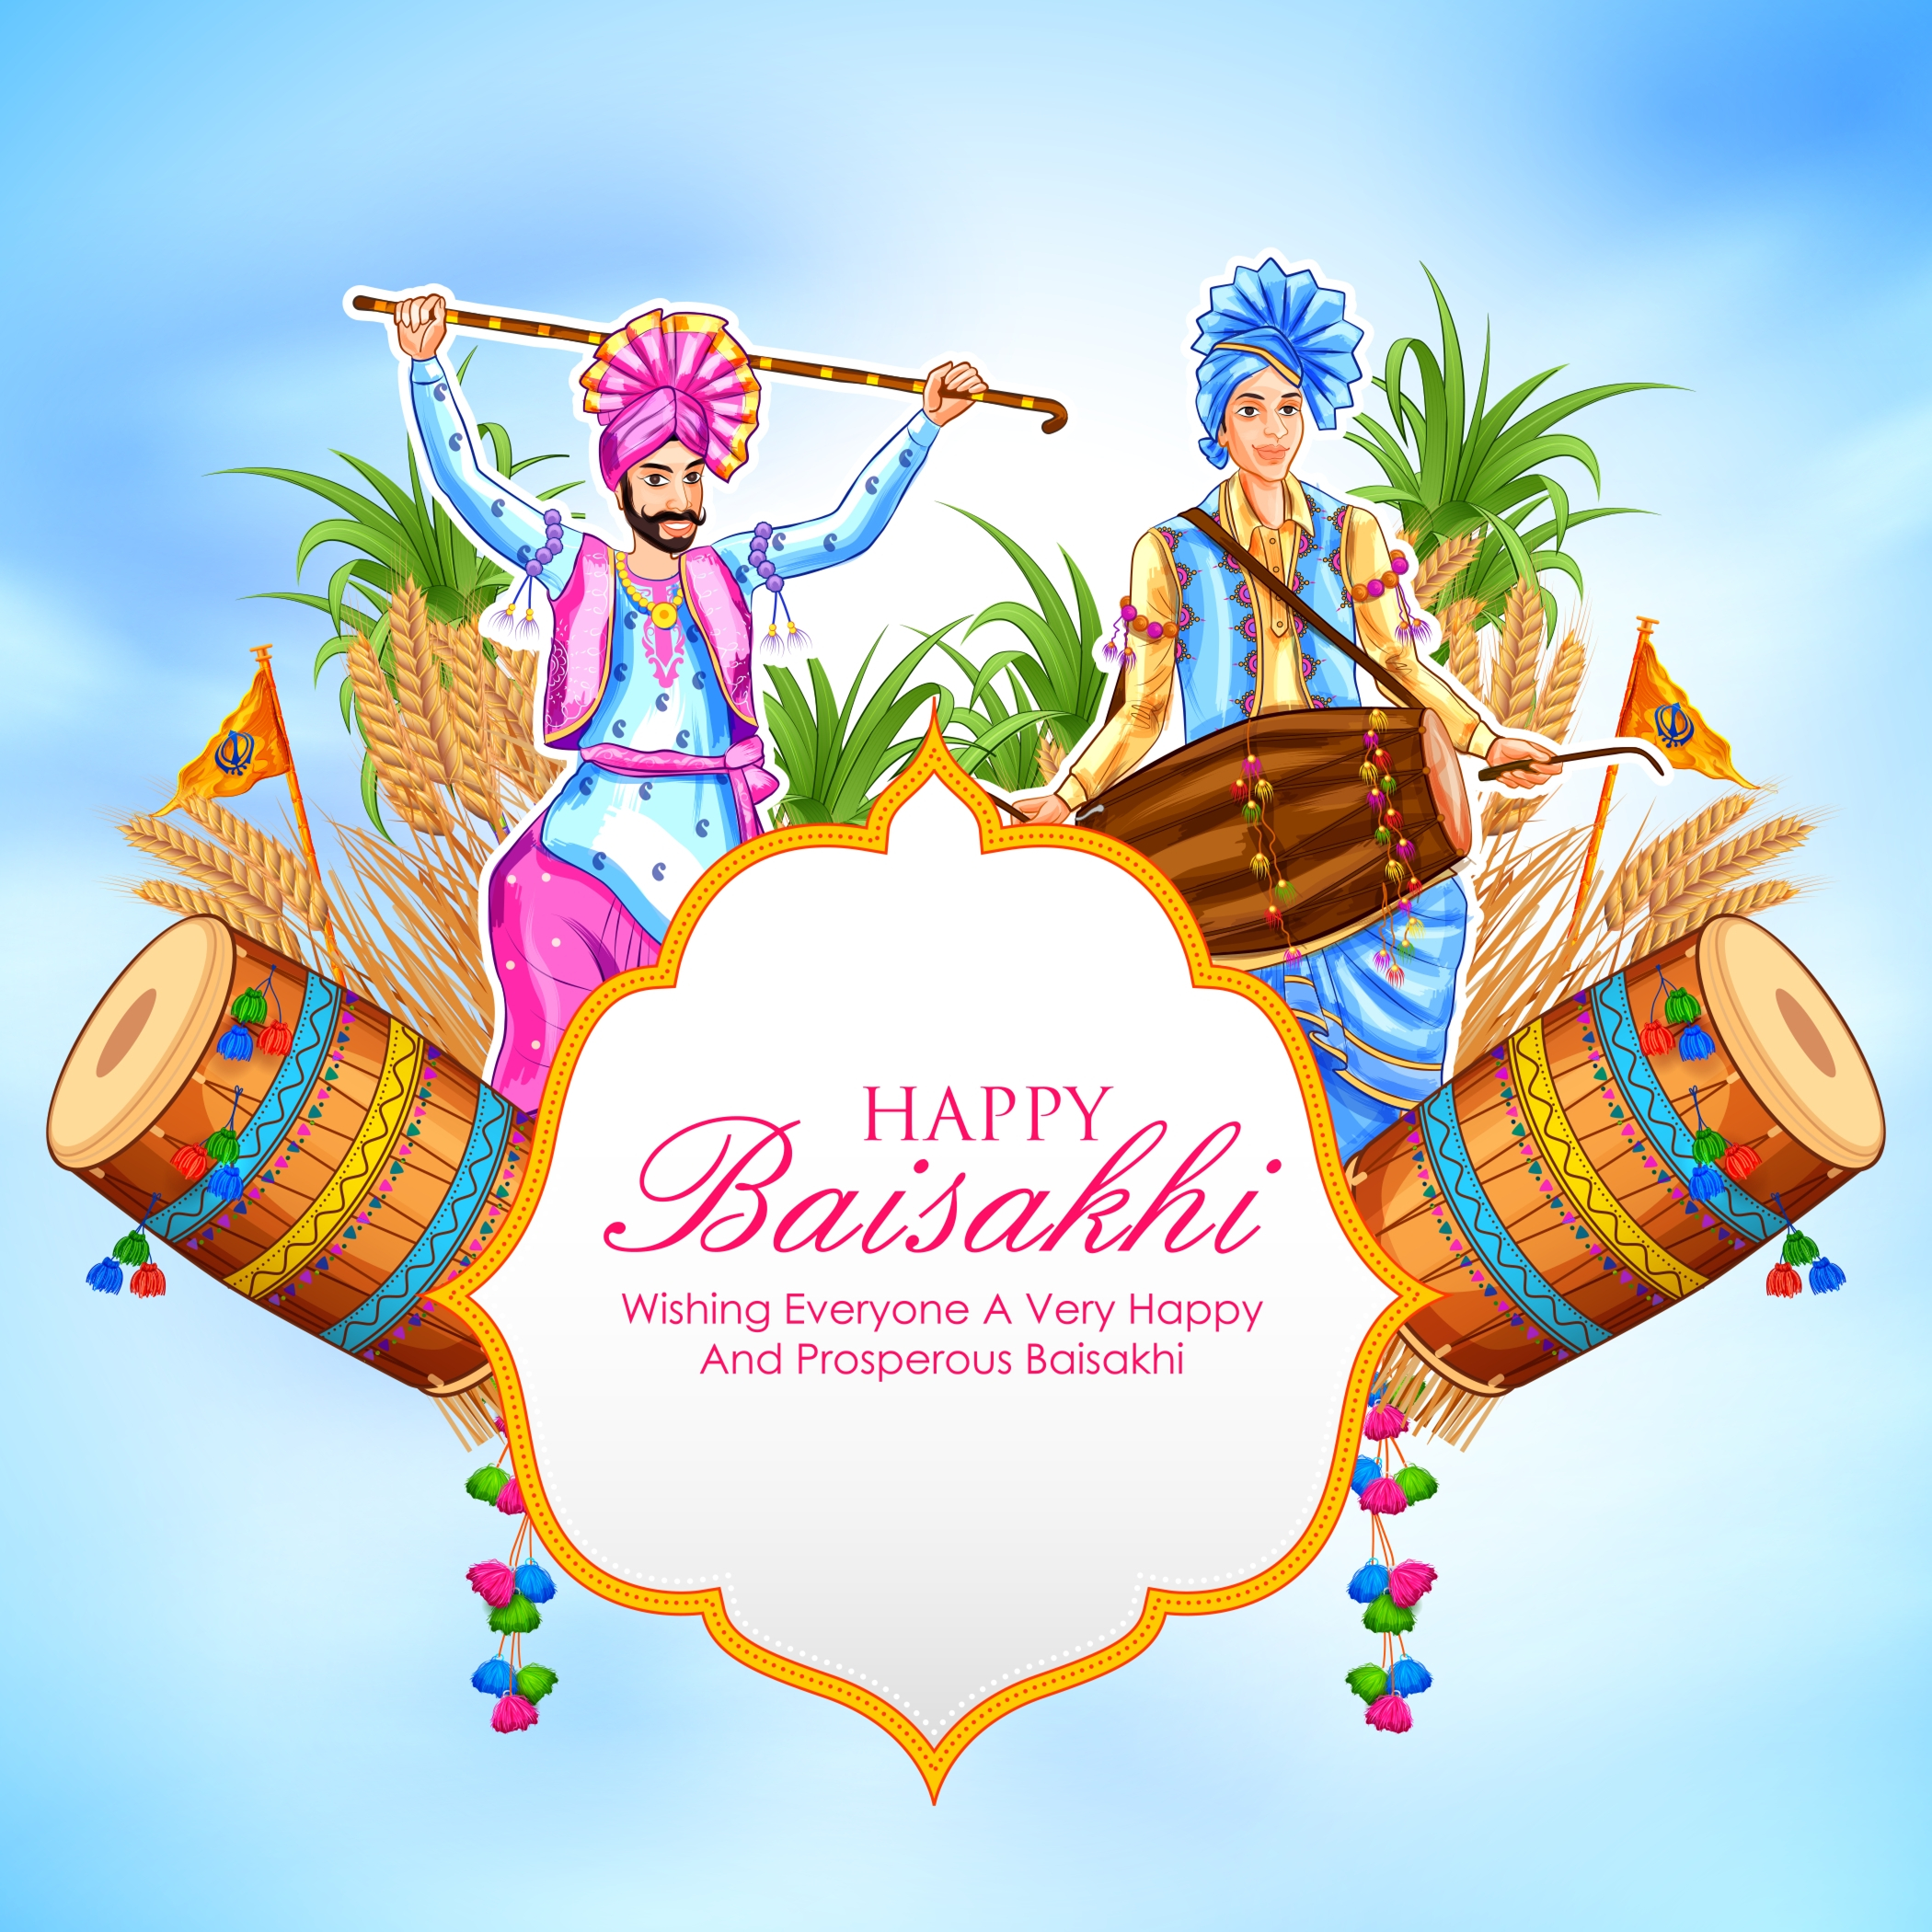 Happy Baisakhi 2022: Wishes, Images, Status, Quotes, Messages and WhatsApp  Greetings to Share in English and Punjabi on Vaisakhi